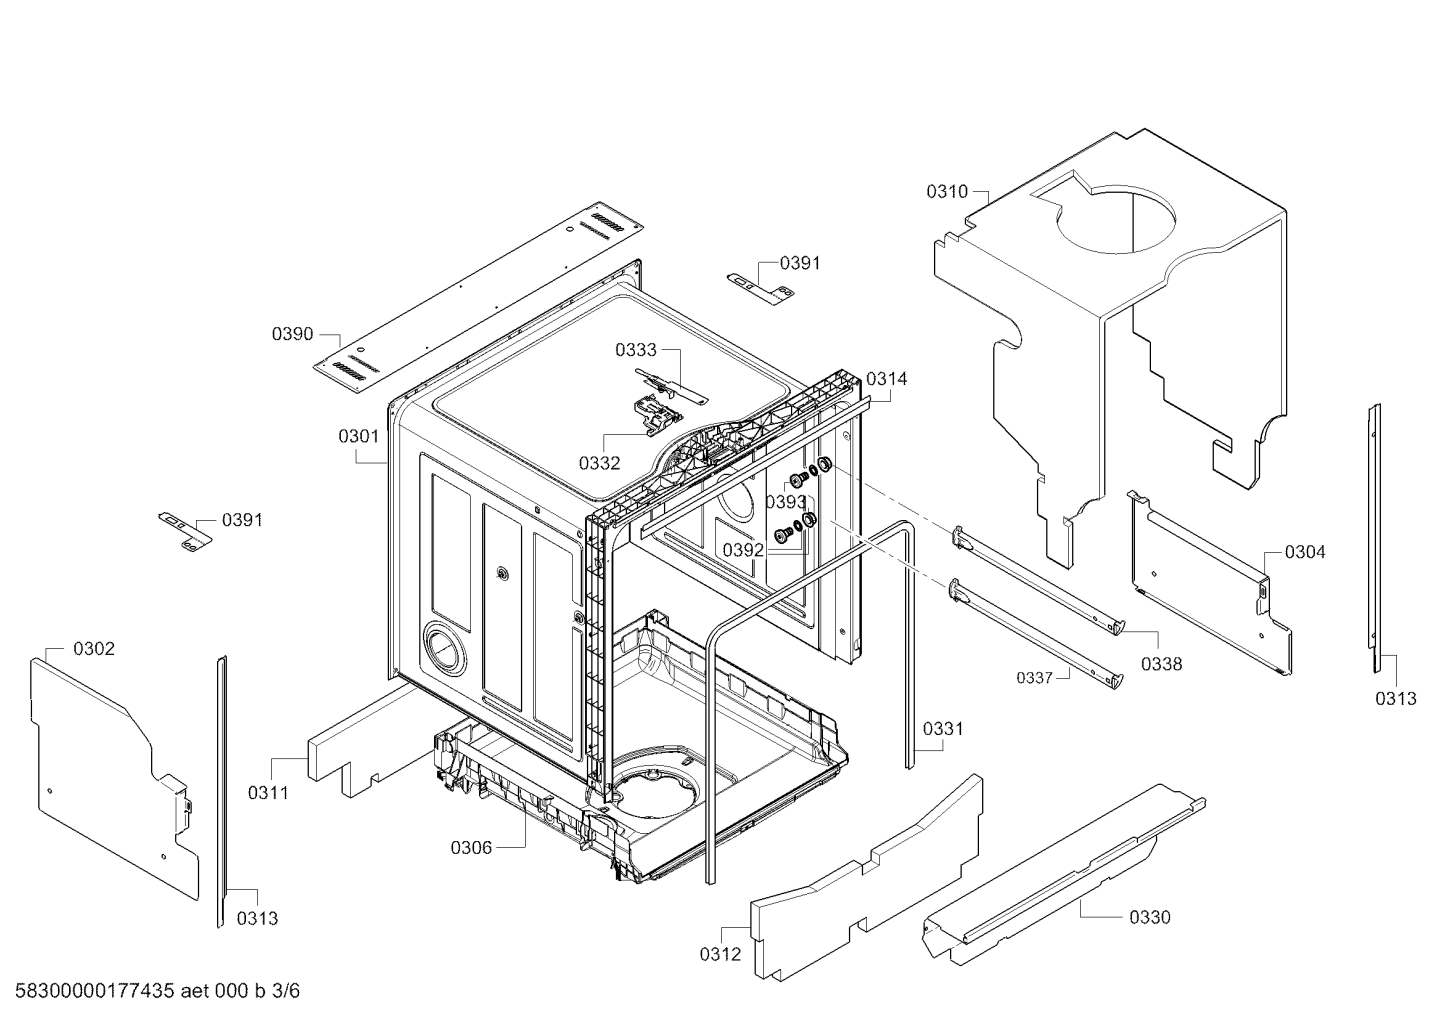 drawing_link_12_device_1747089